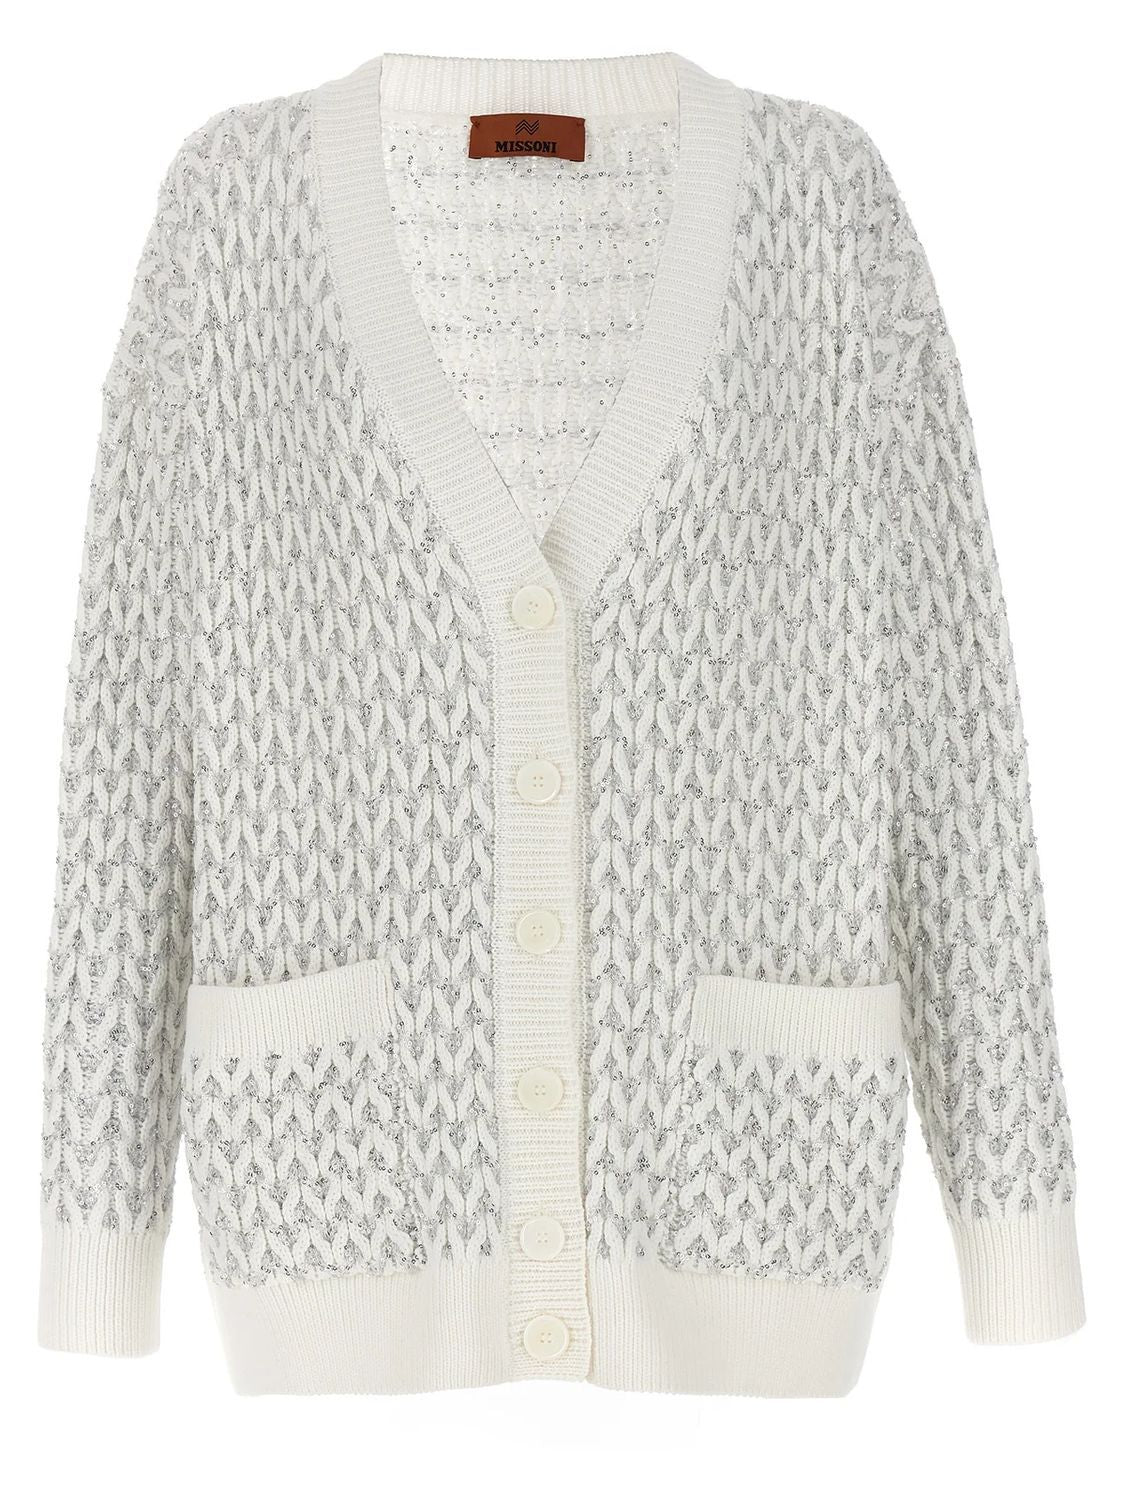 MISSONI Sophisticated Gray Knitwear for Women - SS24 Collection